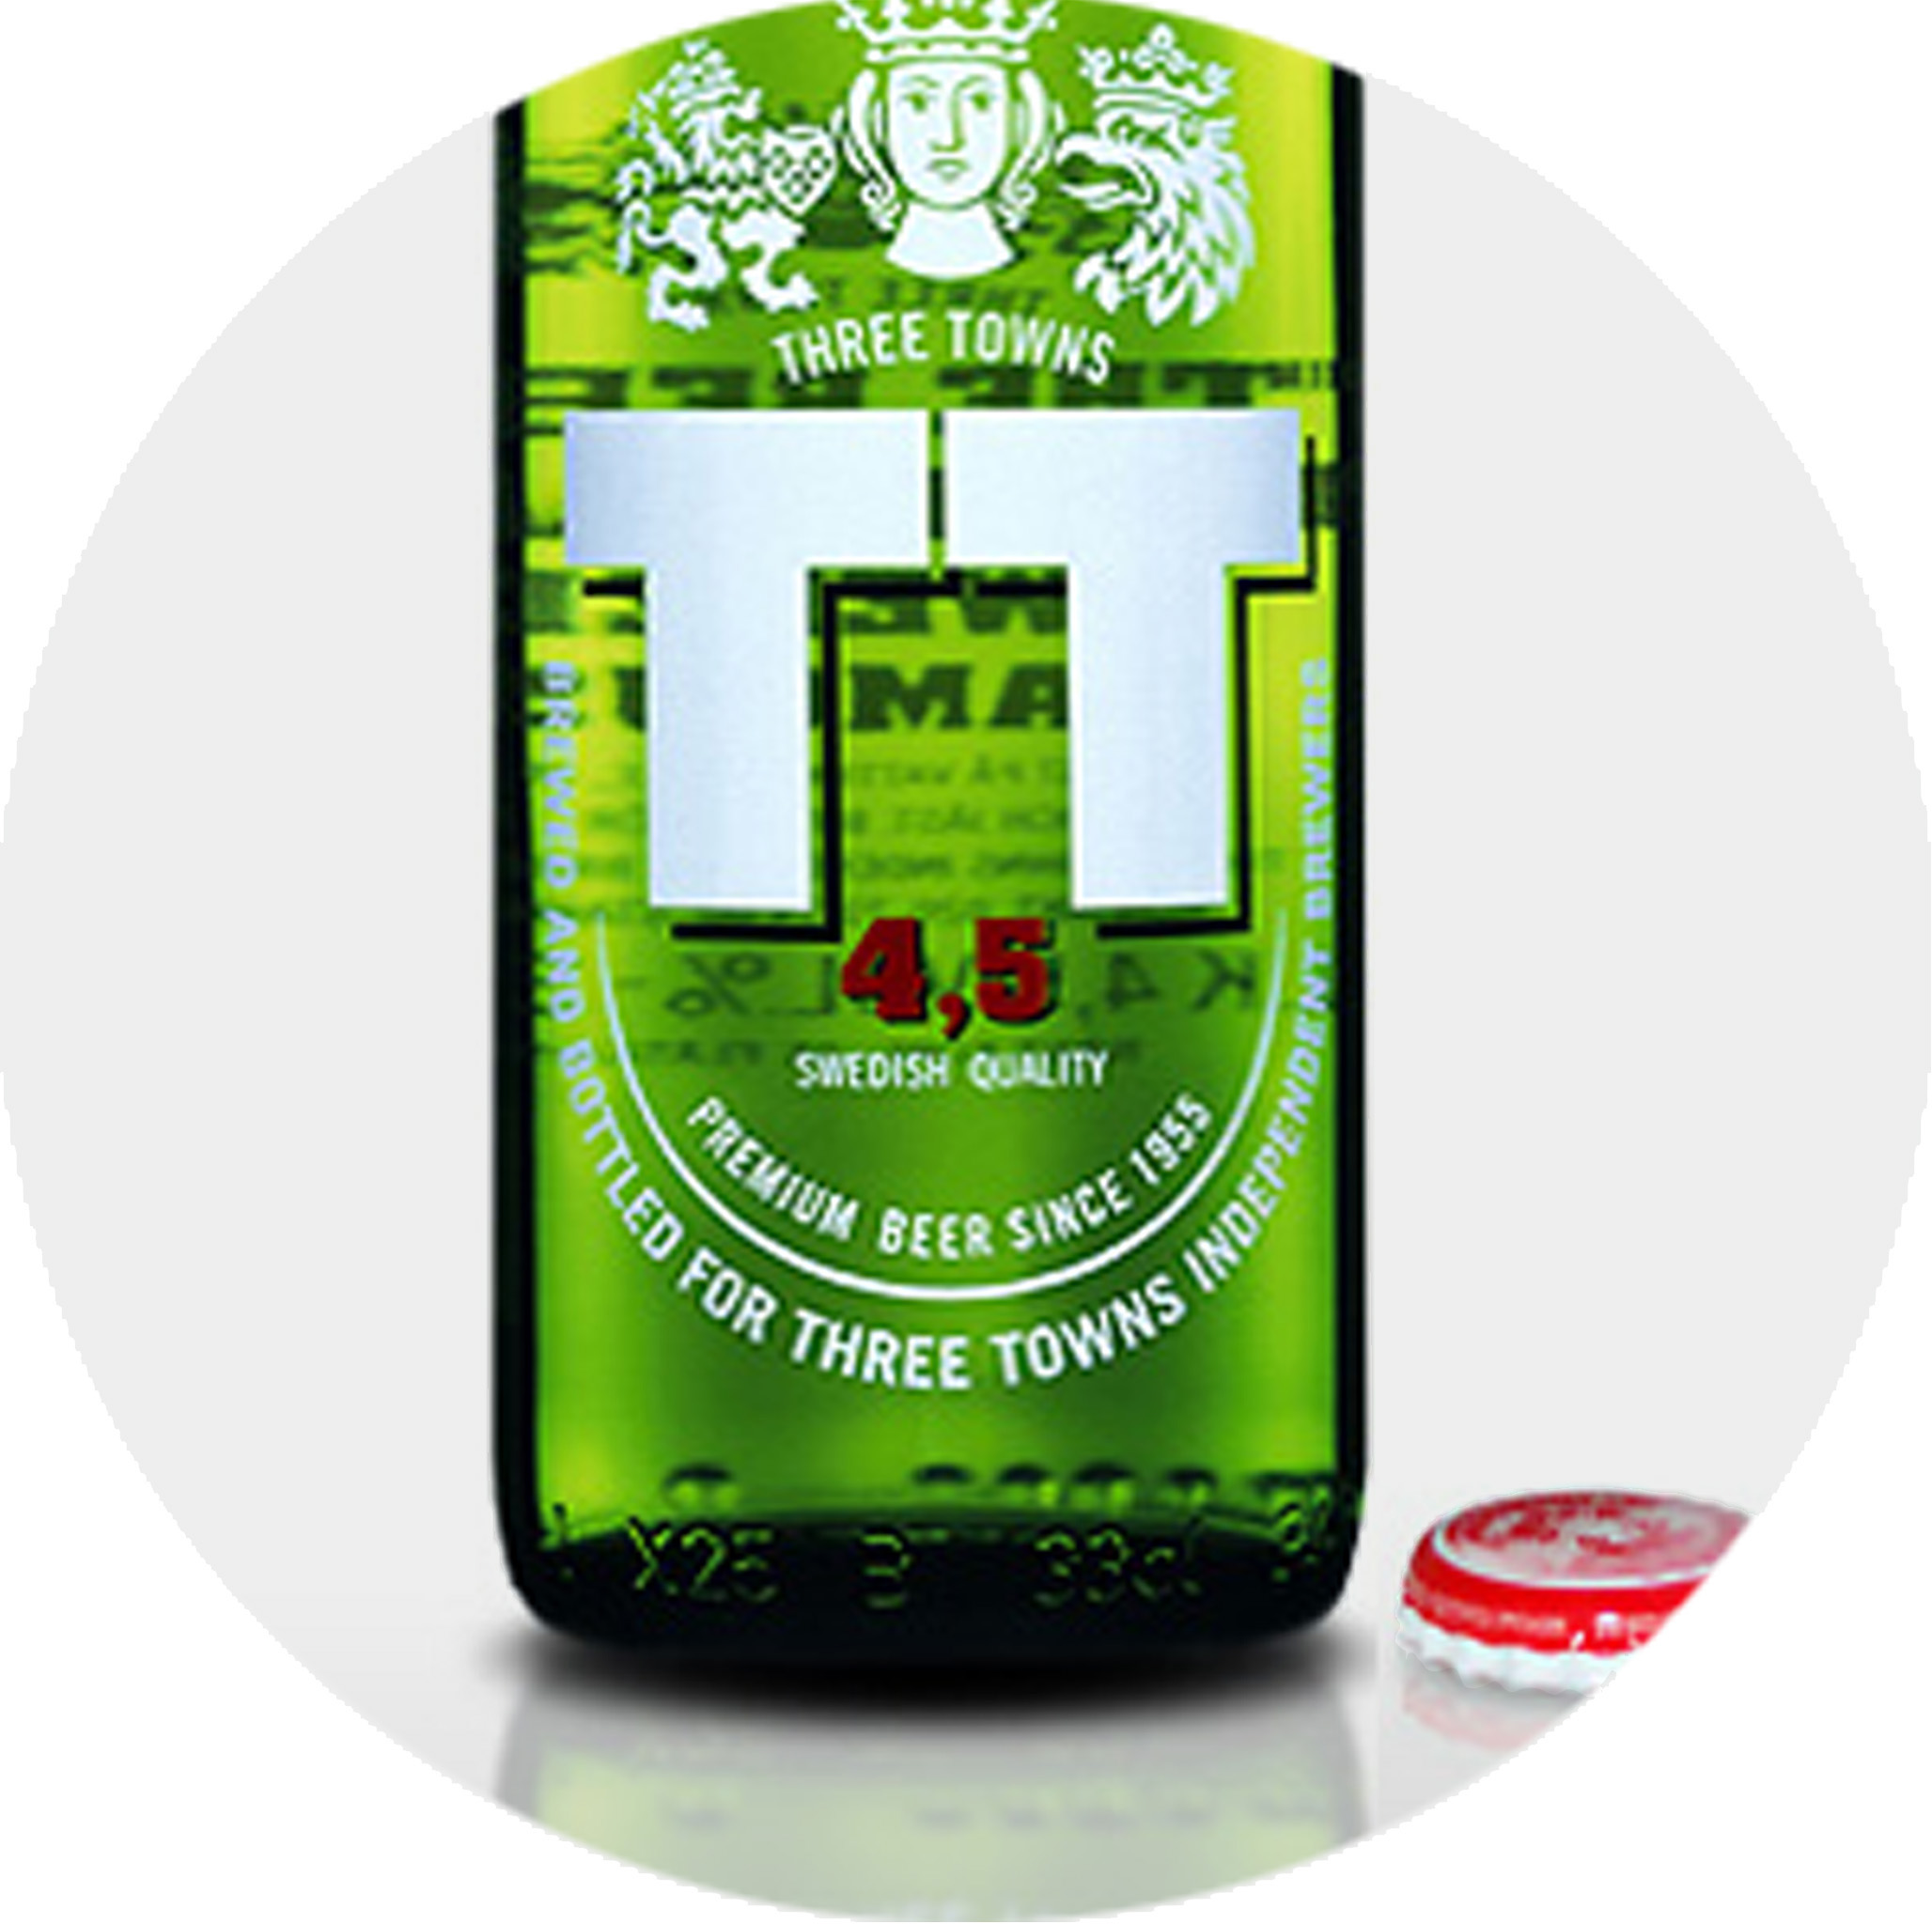 WINNER OF SILVER AWARD, PACKAGING AND LABELING CONCEPT FOR THE SWEDISH BEER BRAND TT (THREE TOWNS).